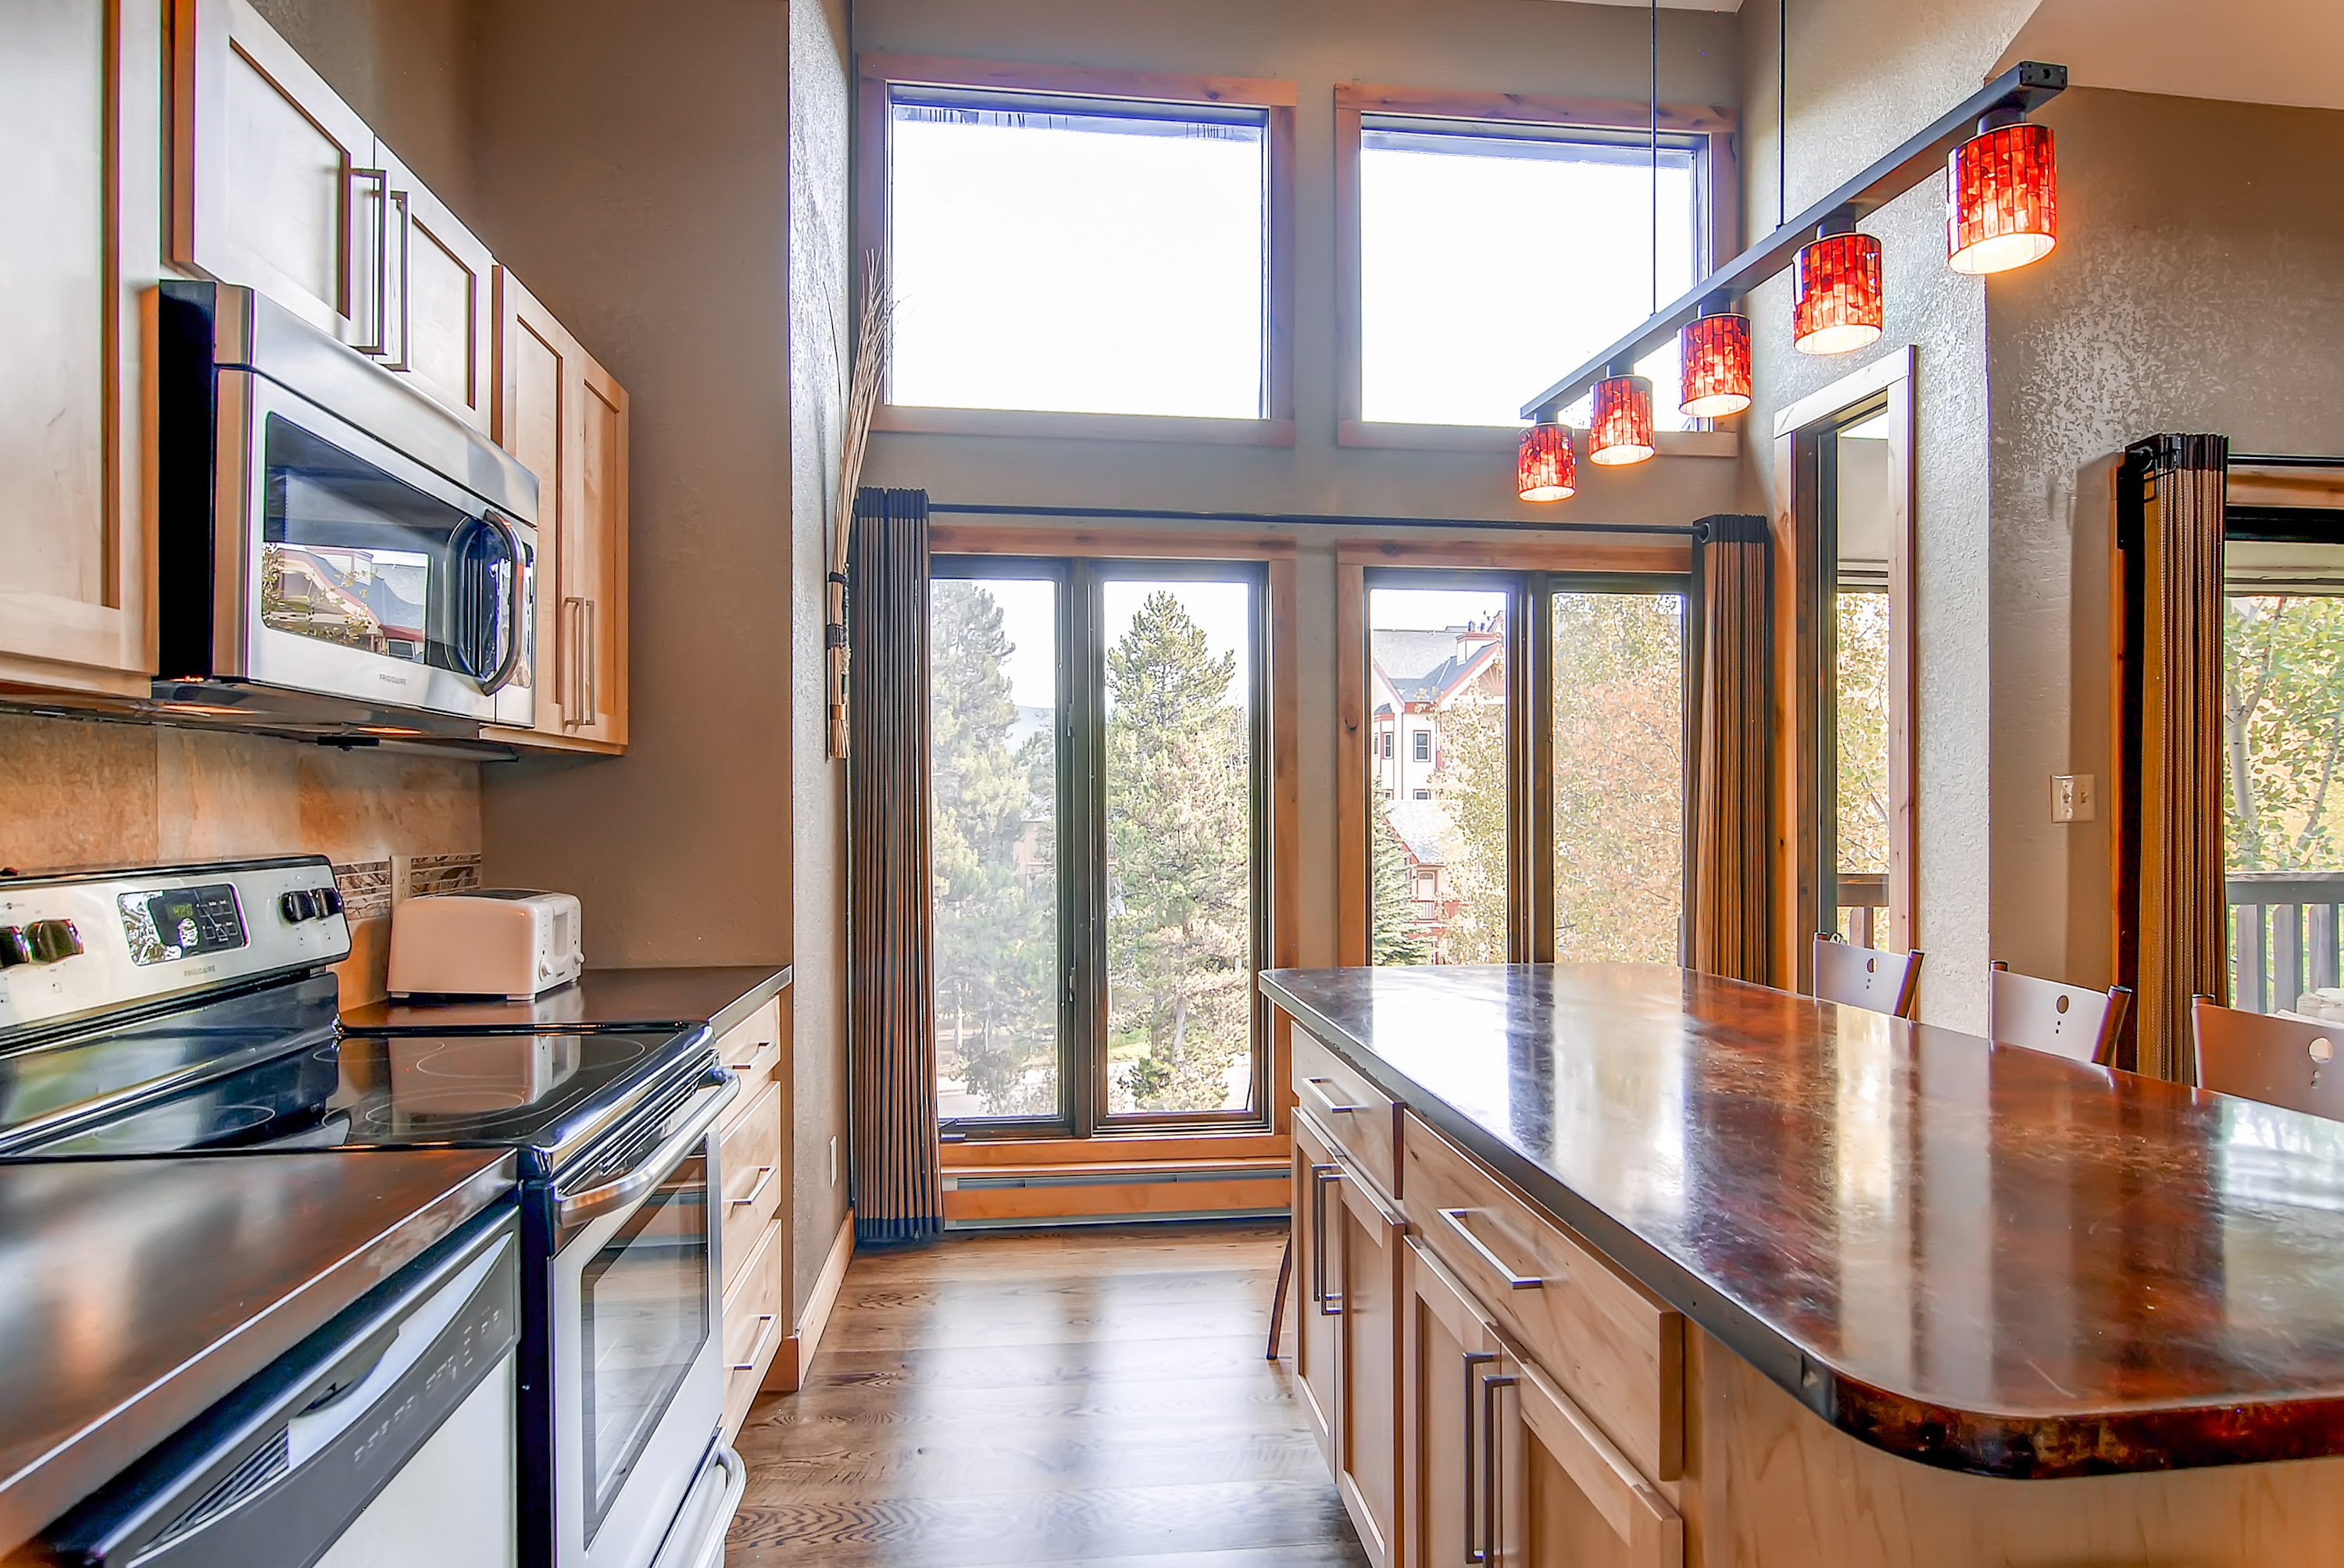 12 Pot Coffee Maker, Toaster and slow-cooker provided in the kitchen - 4 O’Clock Lodge A16 Breckenridge Vacation Rental